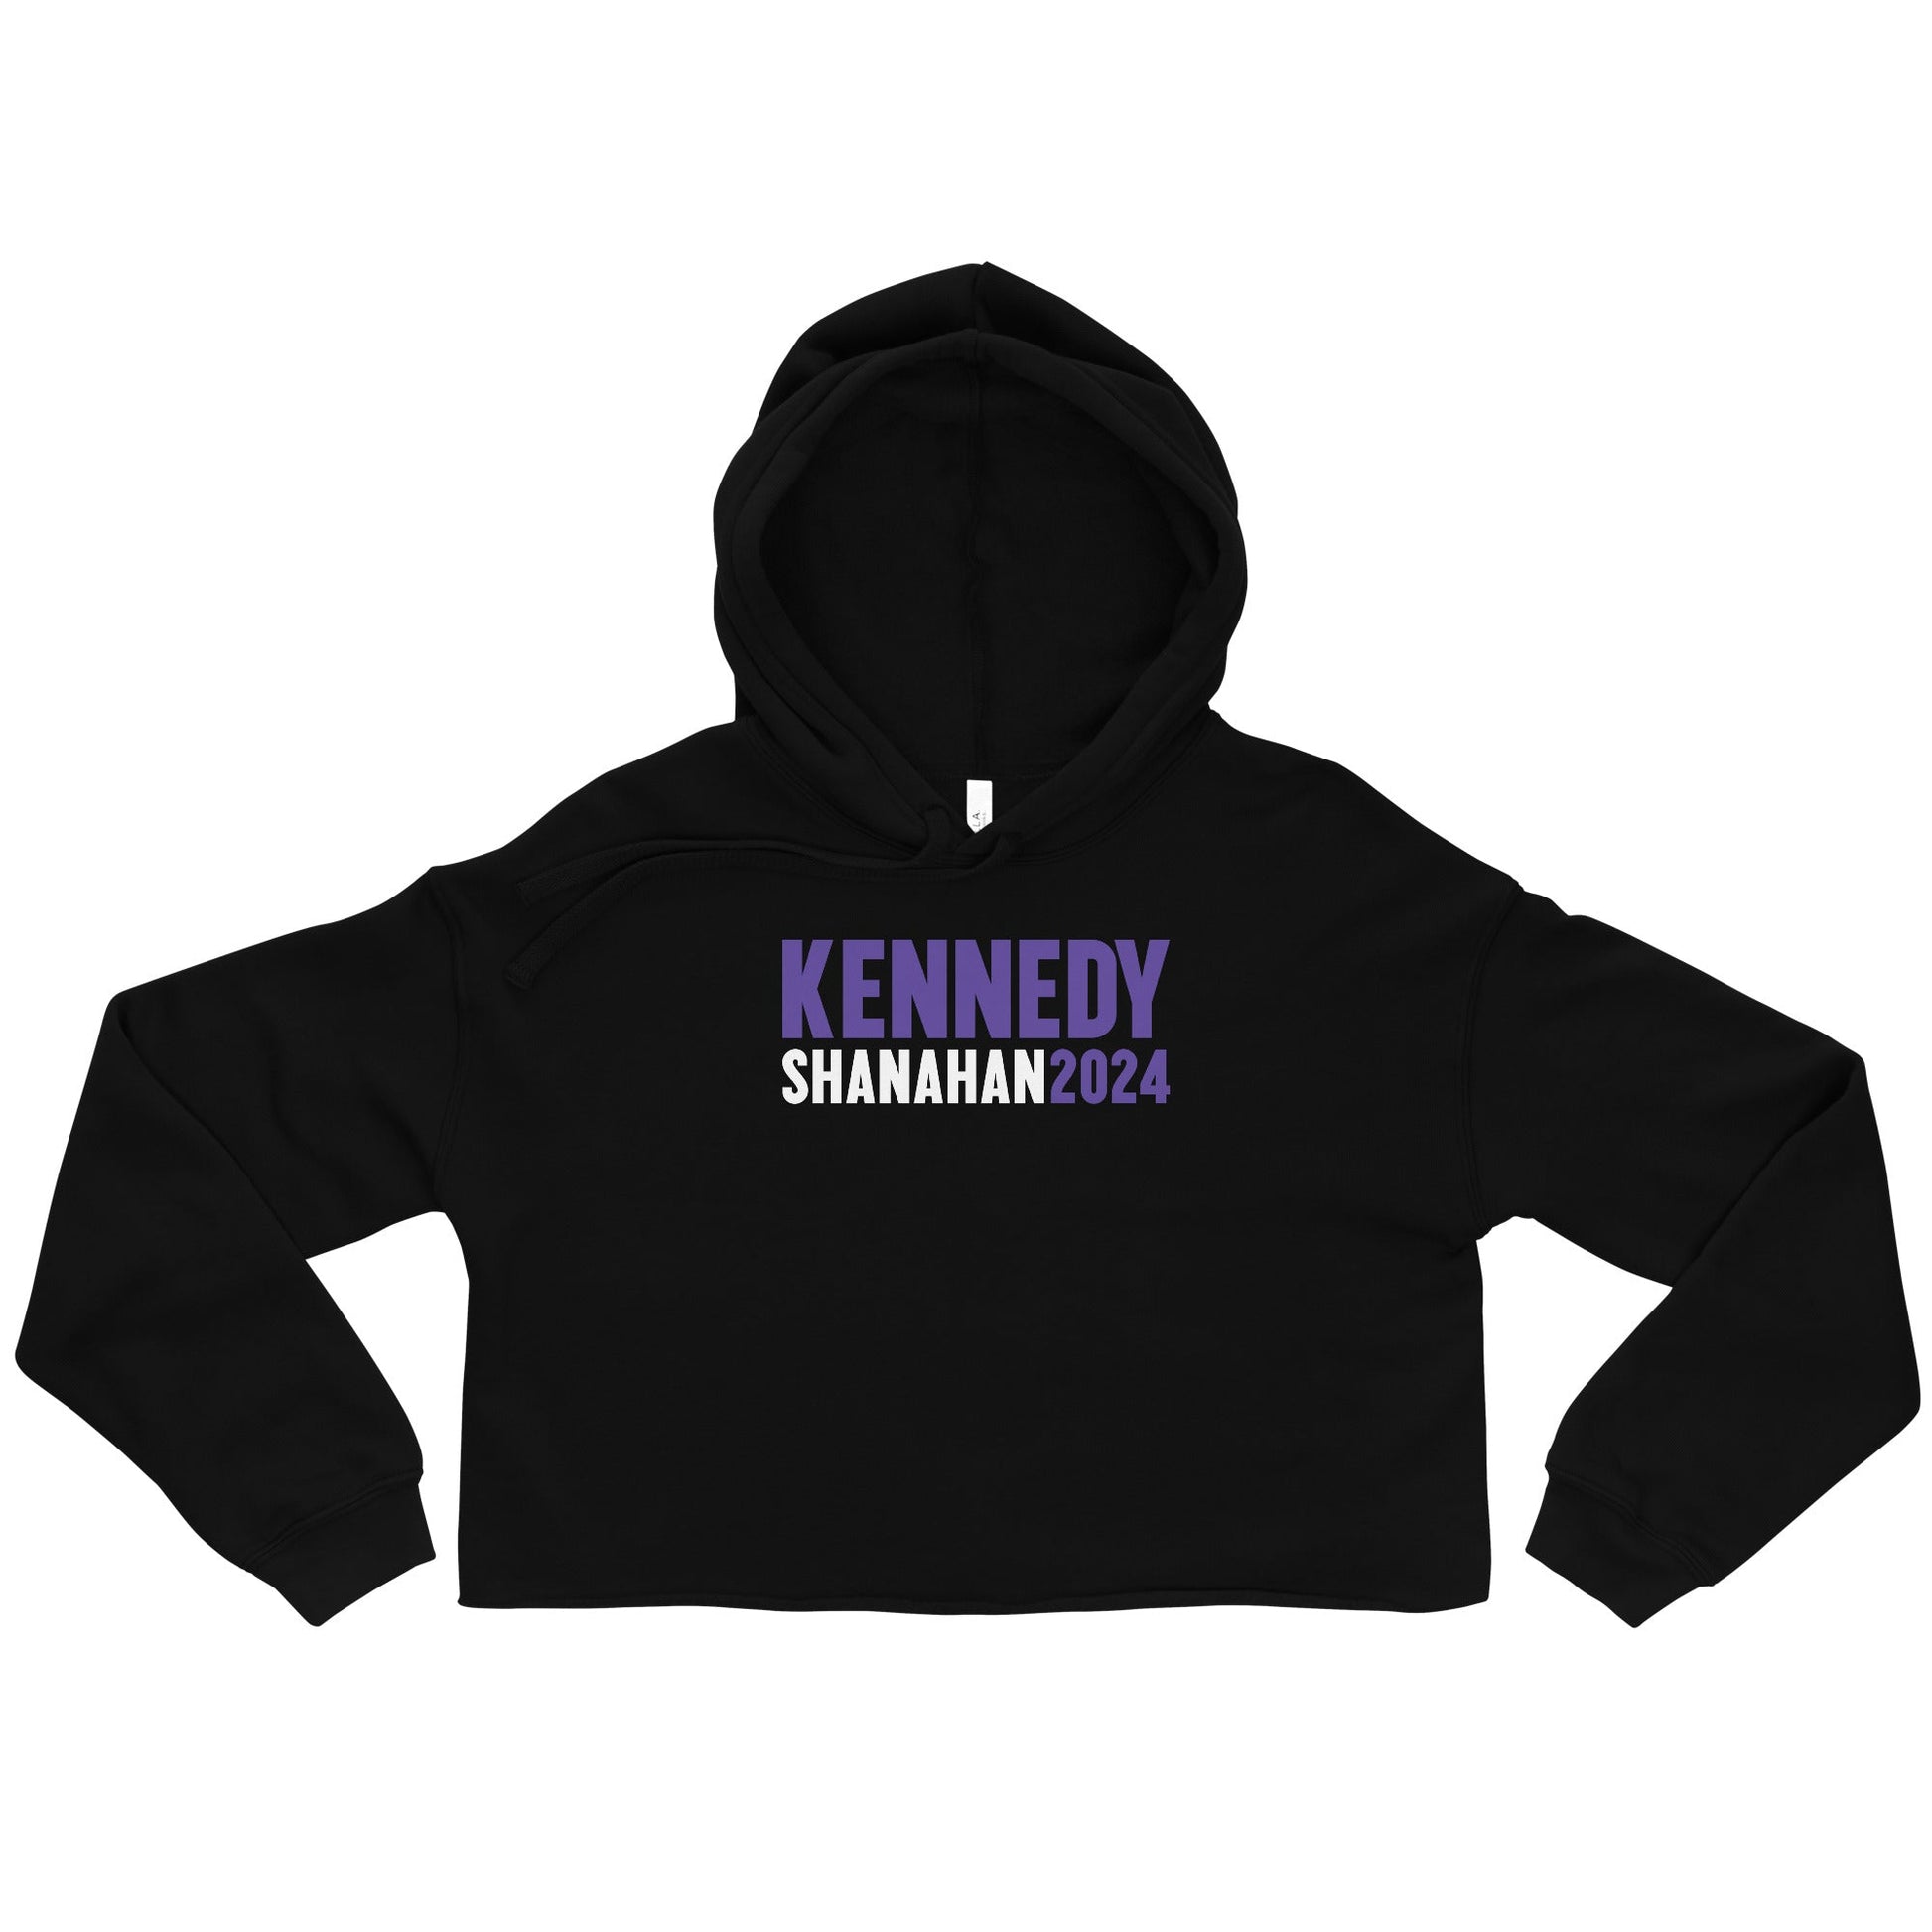 Kennedy X Shanahan II Women's Cropped Hoodie - TEAM KENNEDY. All rights reserved